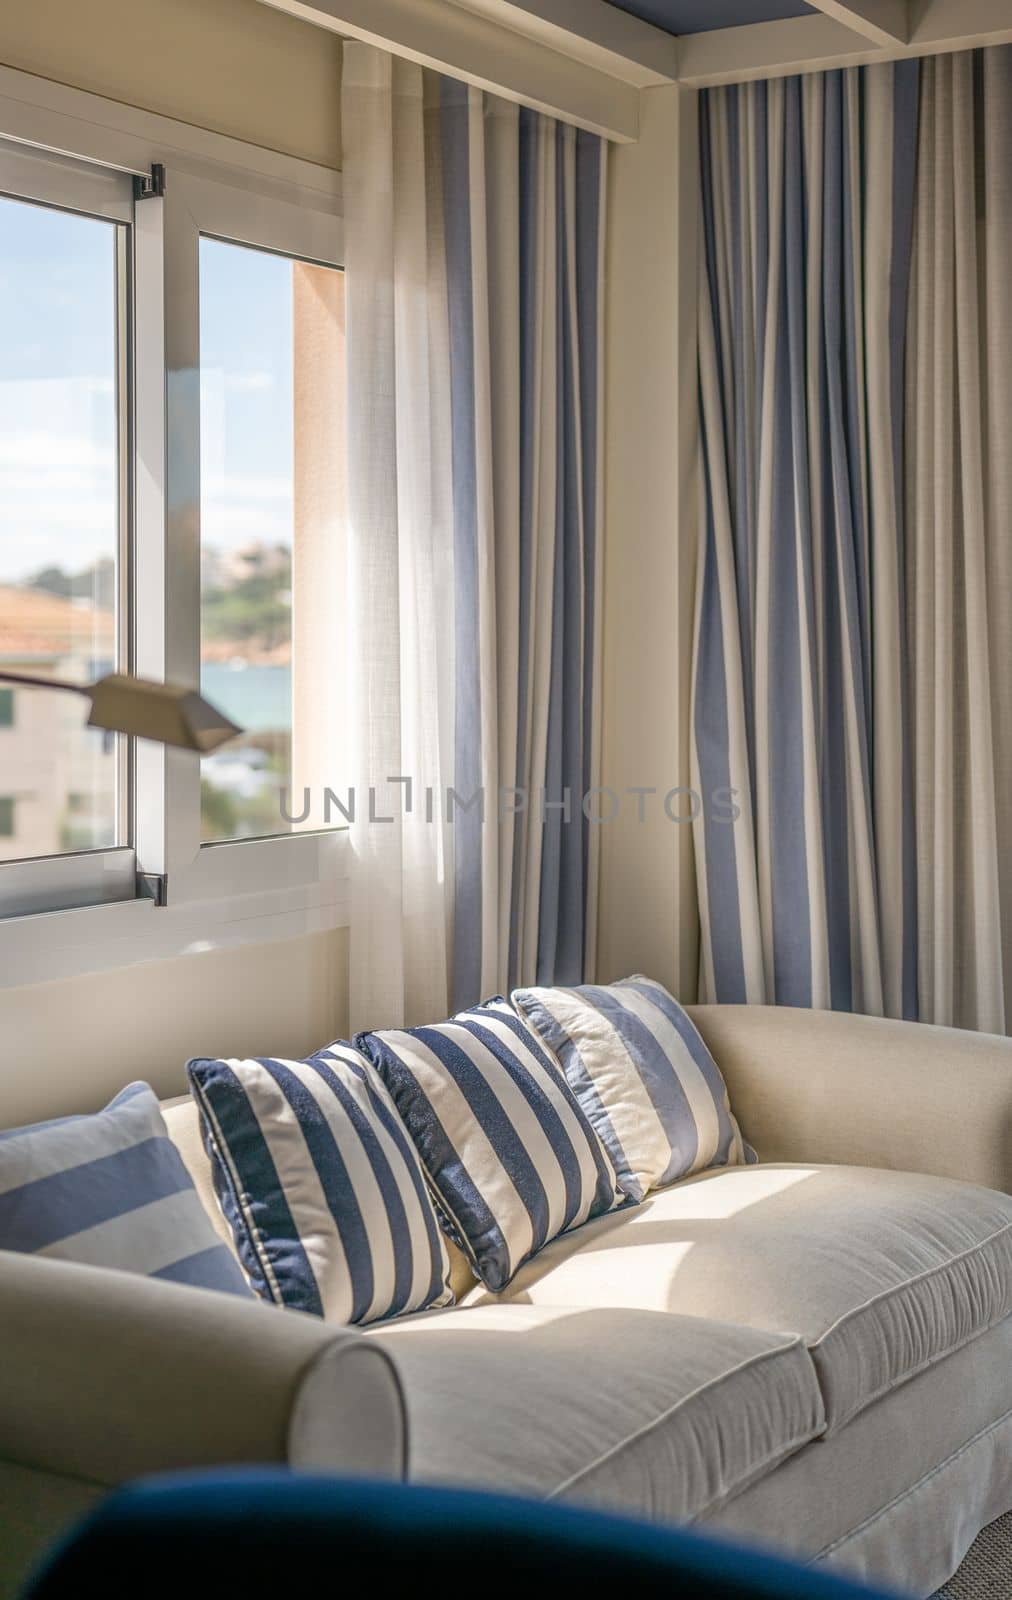 Closeup of cozy upholstered sofa in beige color with decorative pillows in vertical blue-beige stripes and curtains in same style. Cozy living room flooded with bright sunlight from window